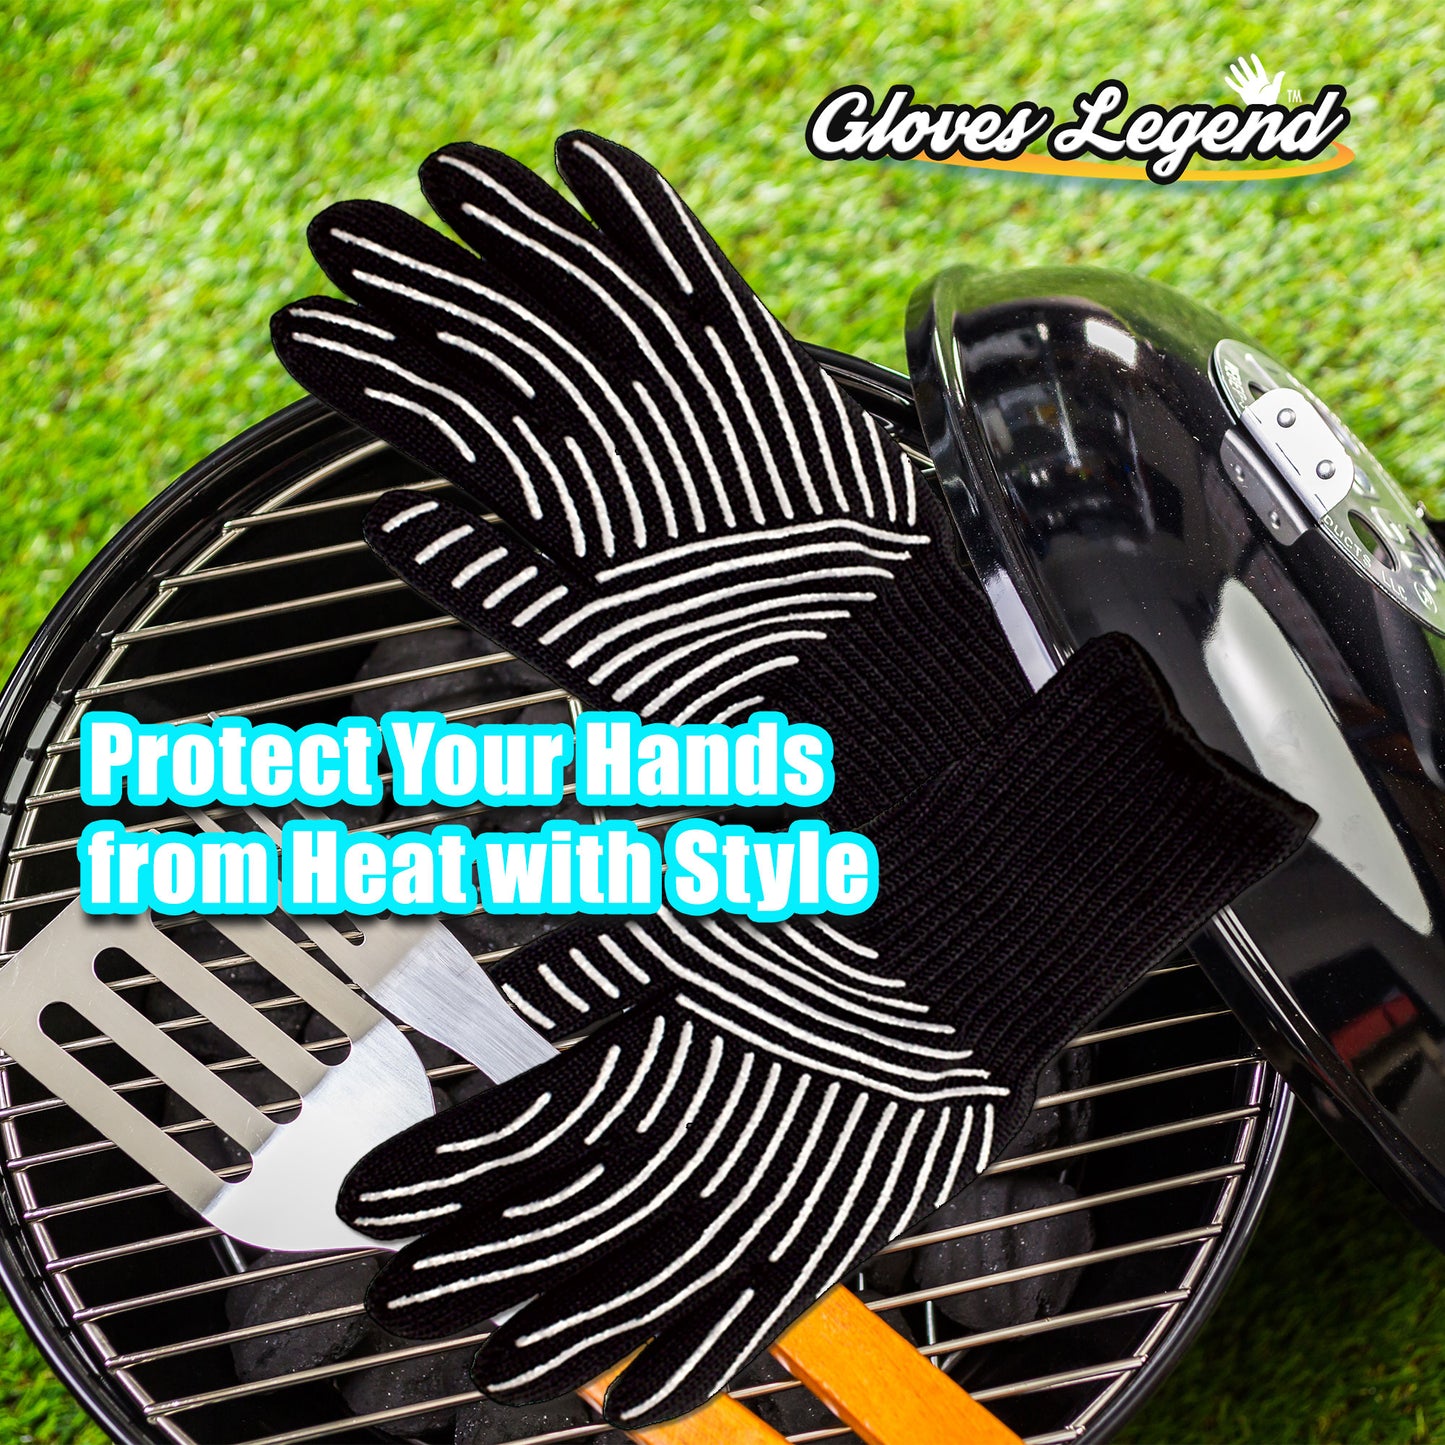 1 Pair (2 Gloves) Gloves Legend Extra Long Cuff Oven Mitts Heat Resistant Grill BBQ Barbecue Cooking Gloves